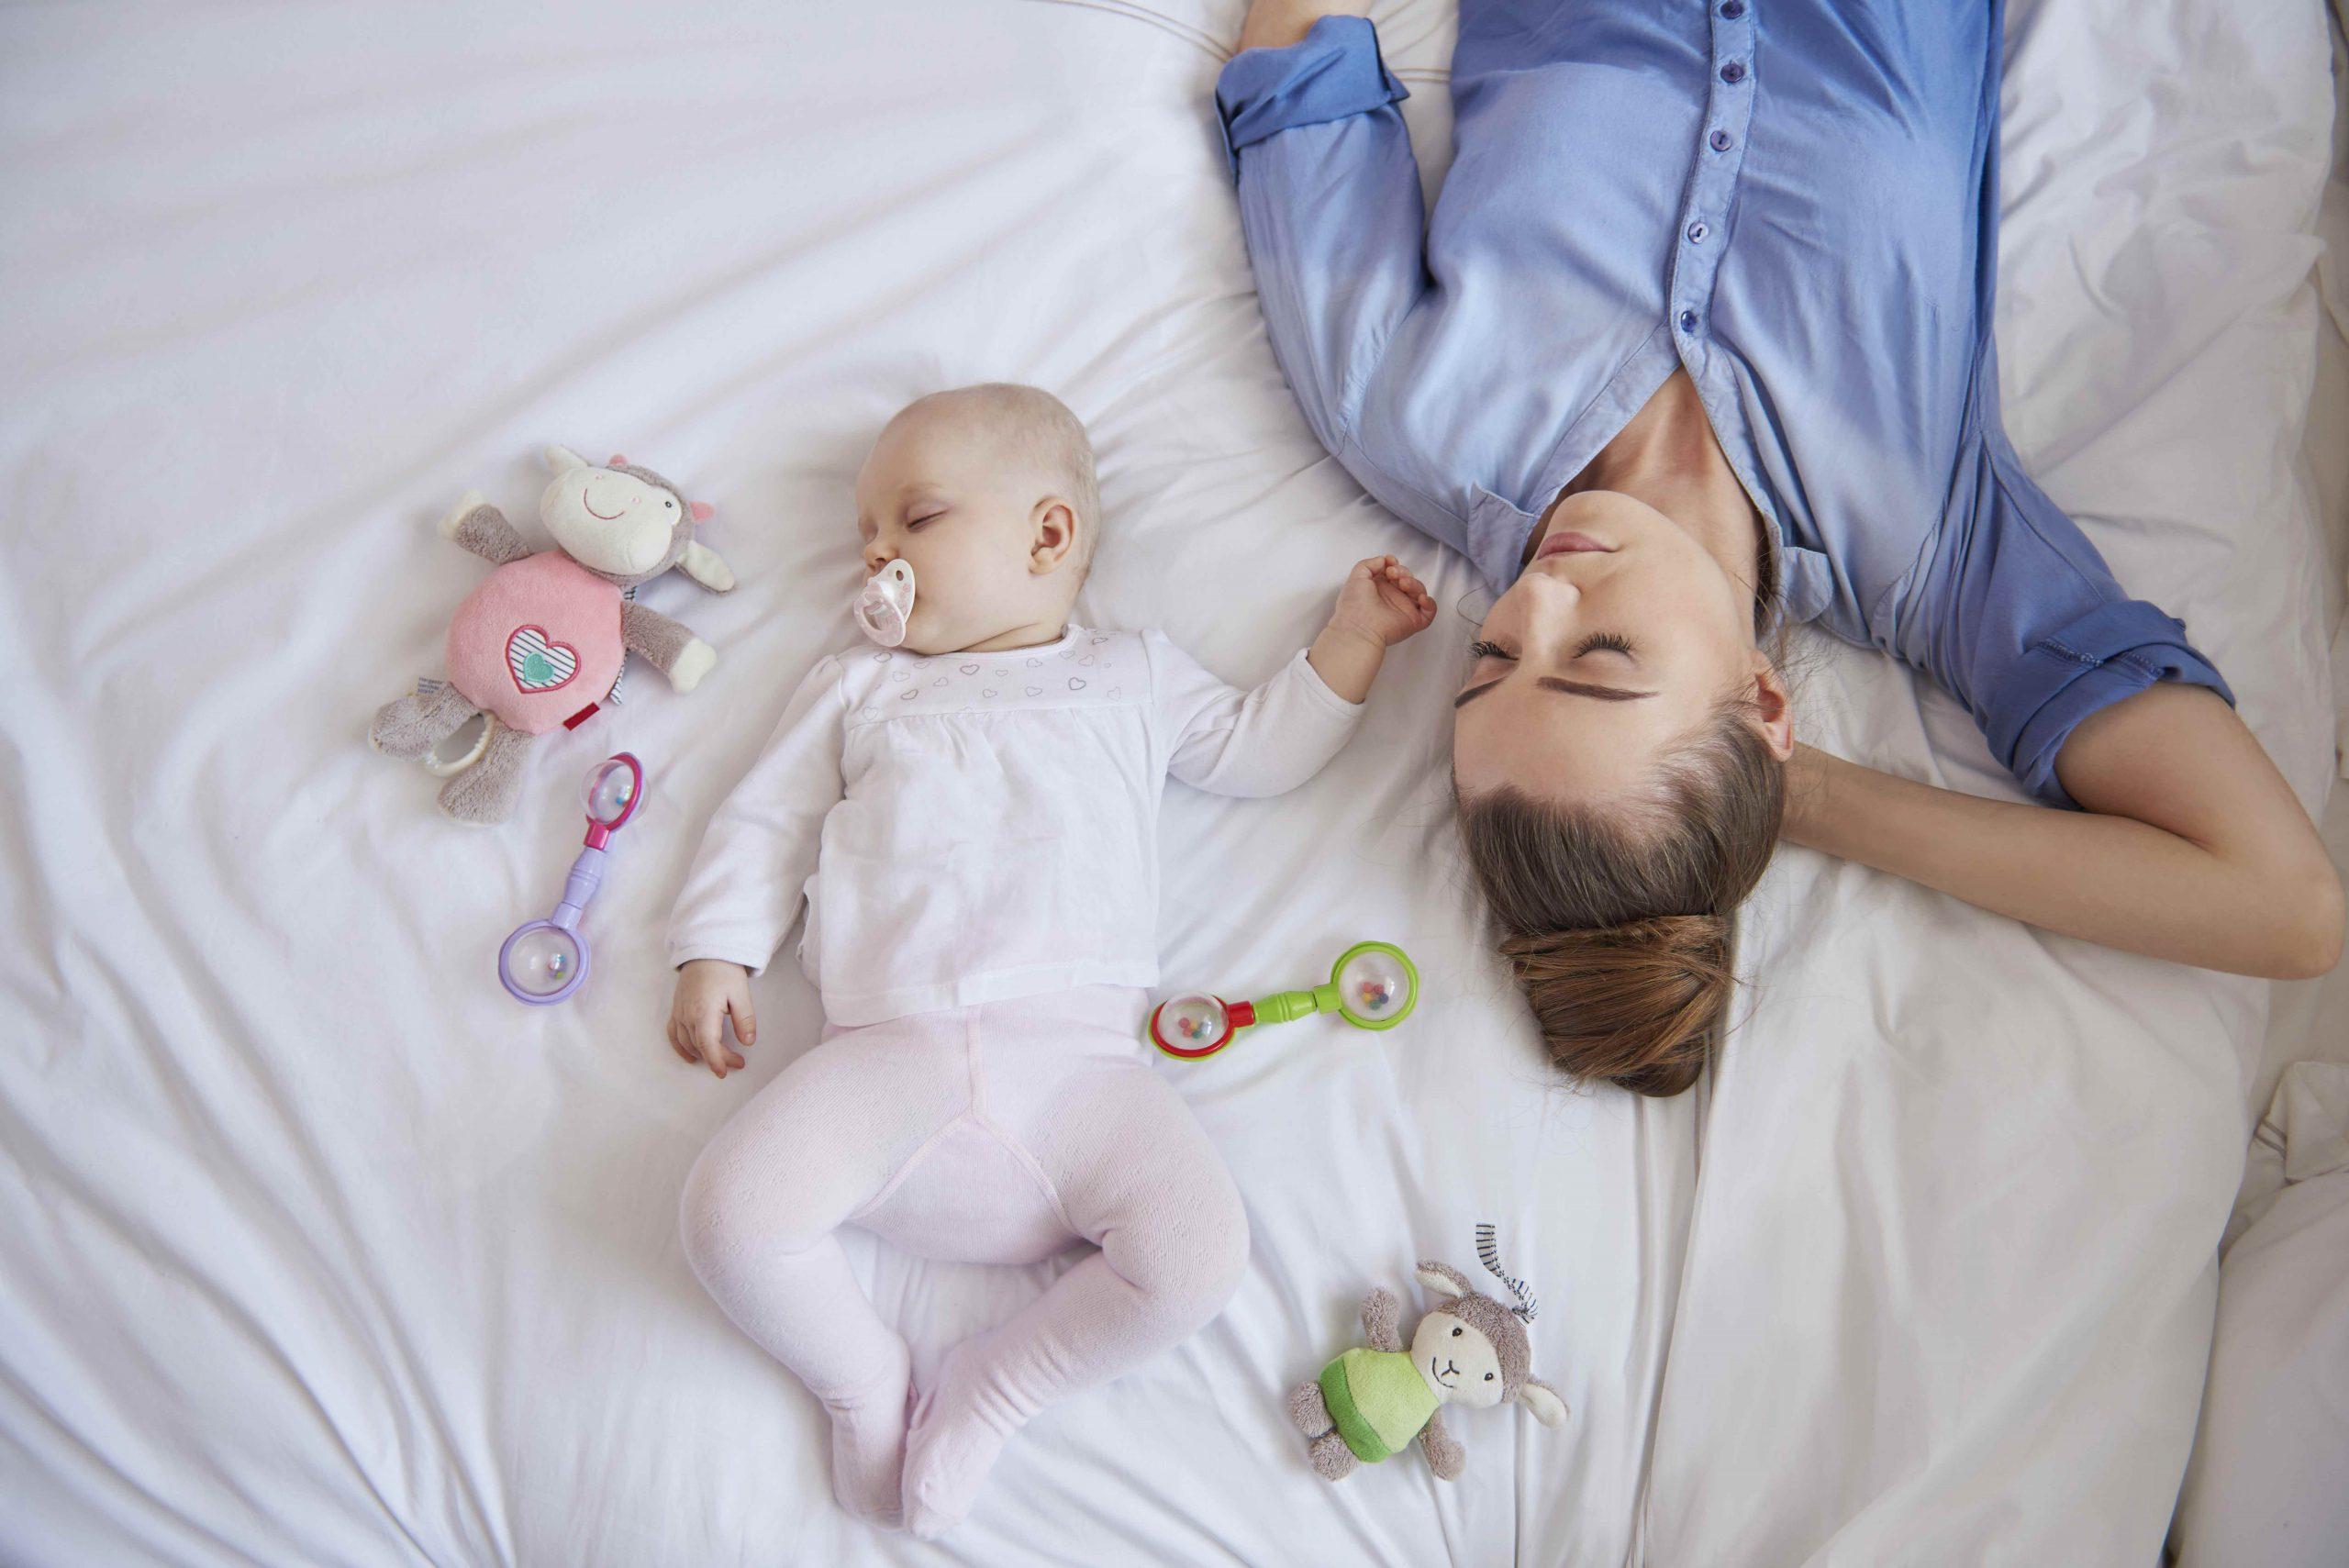 How to get sleep when you're a new mom? Sleep deprivation is real and it's hard. Here are tips on what to do.